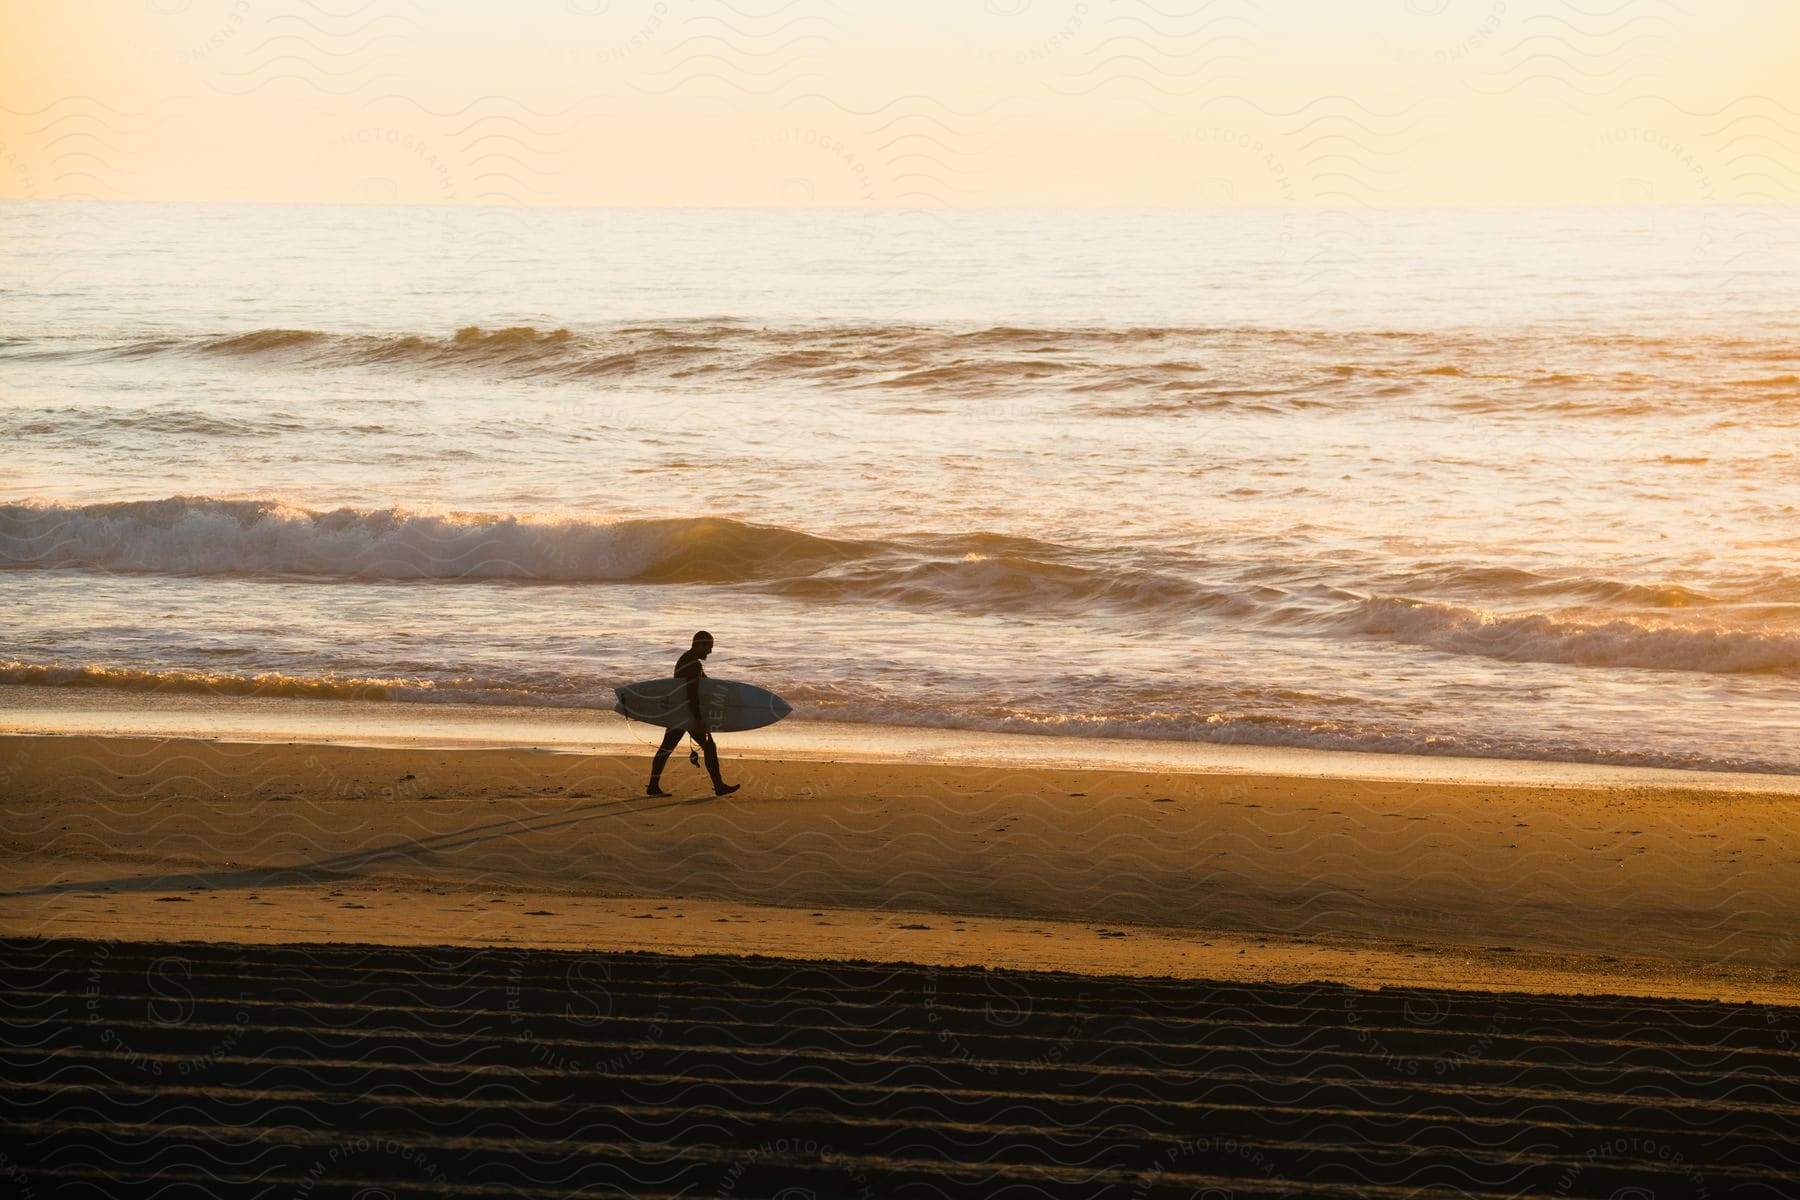 A person in their 20s or 30s wearing a wetsuit is carrying a surfboard on the beach near the ocean at sunset